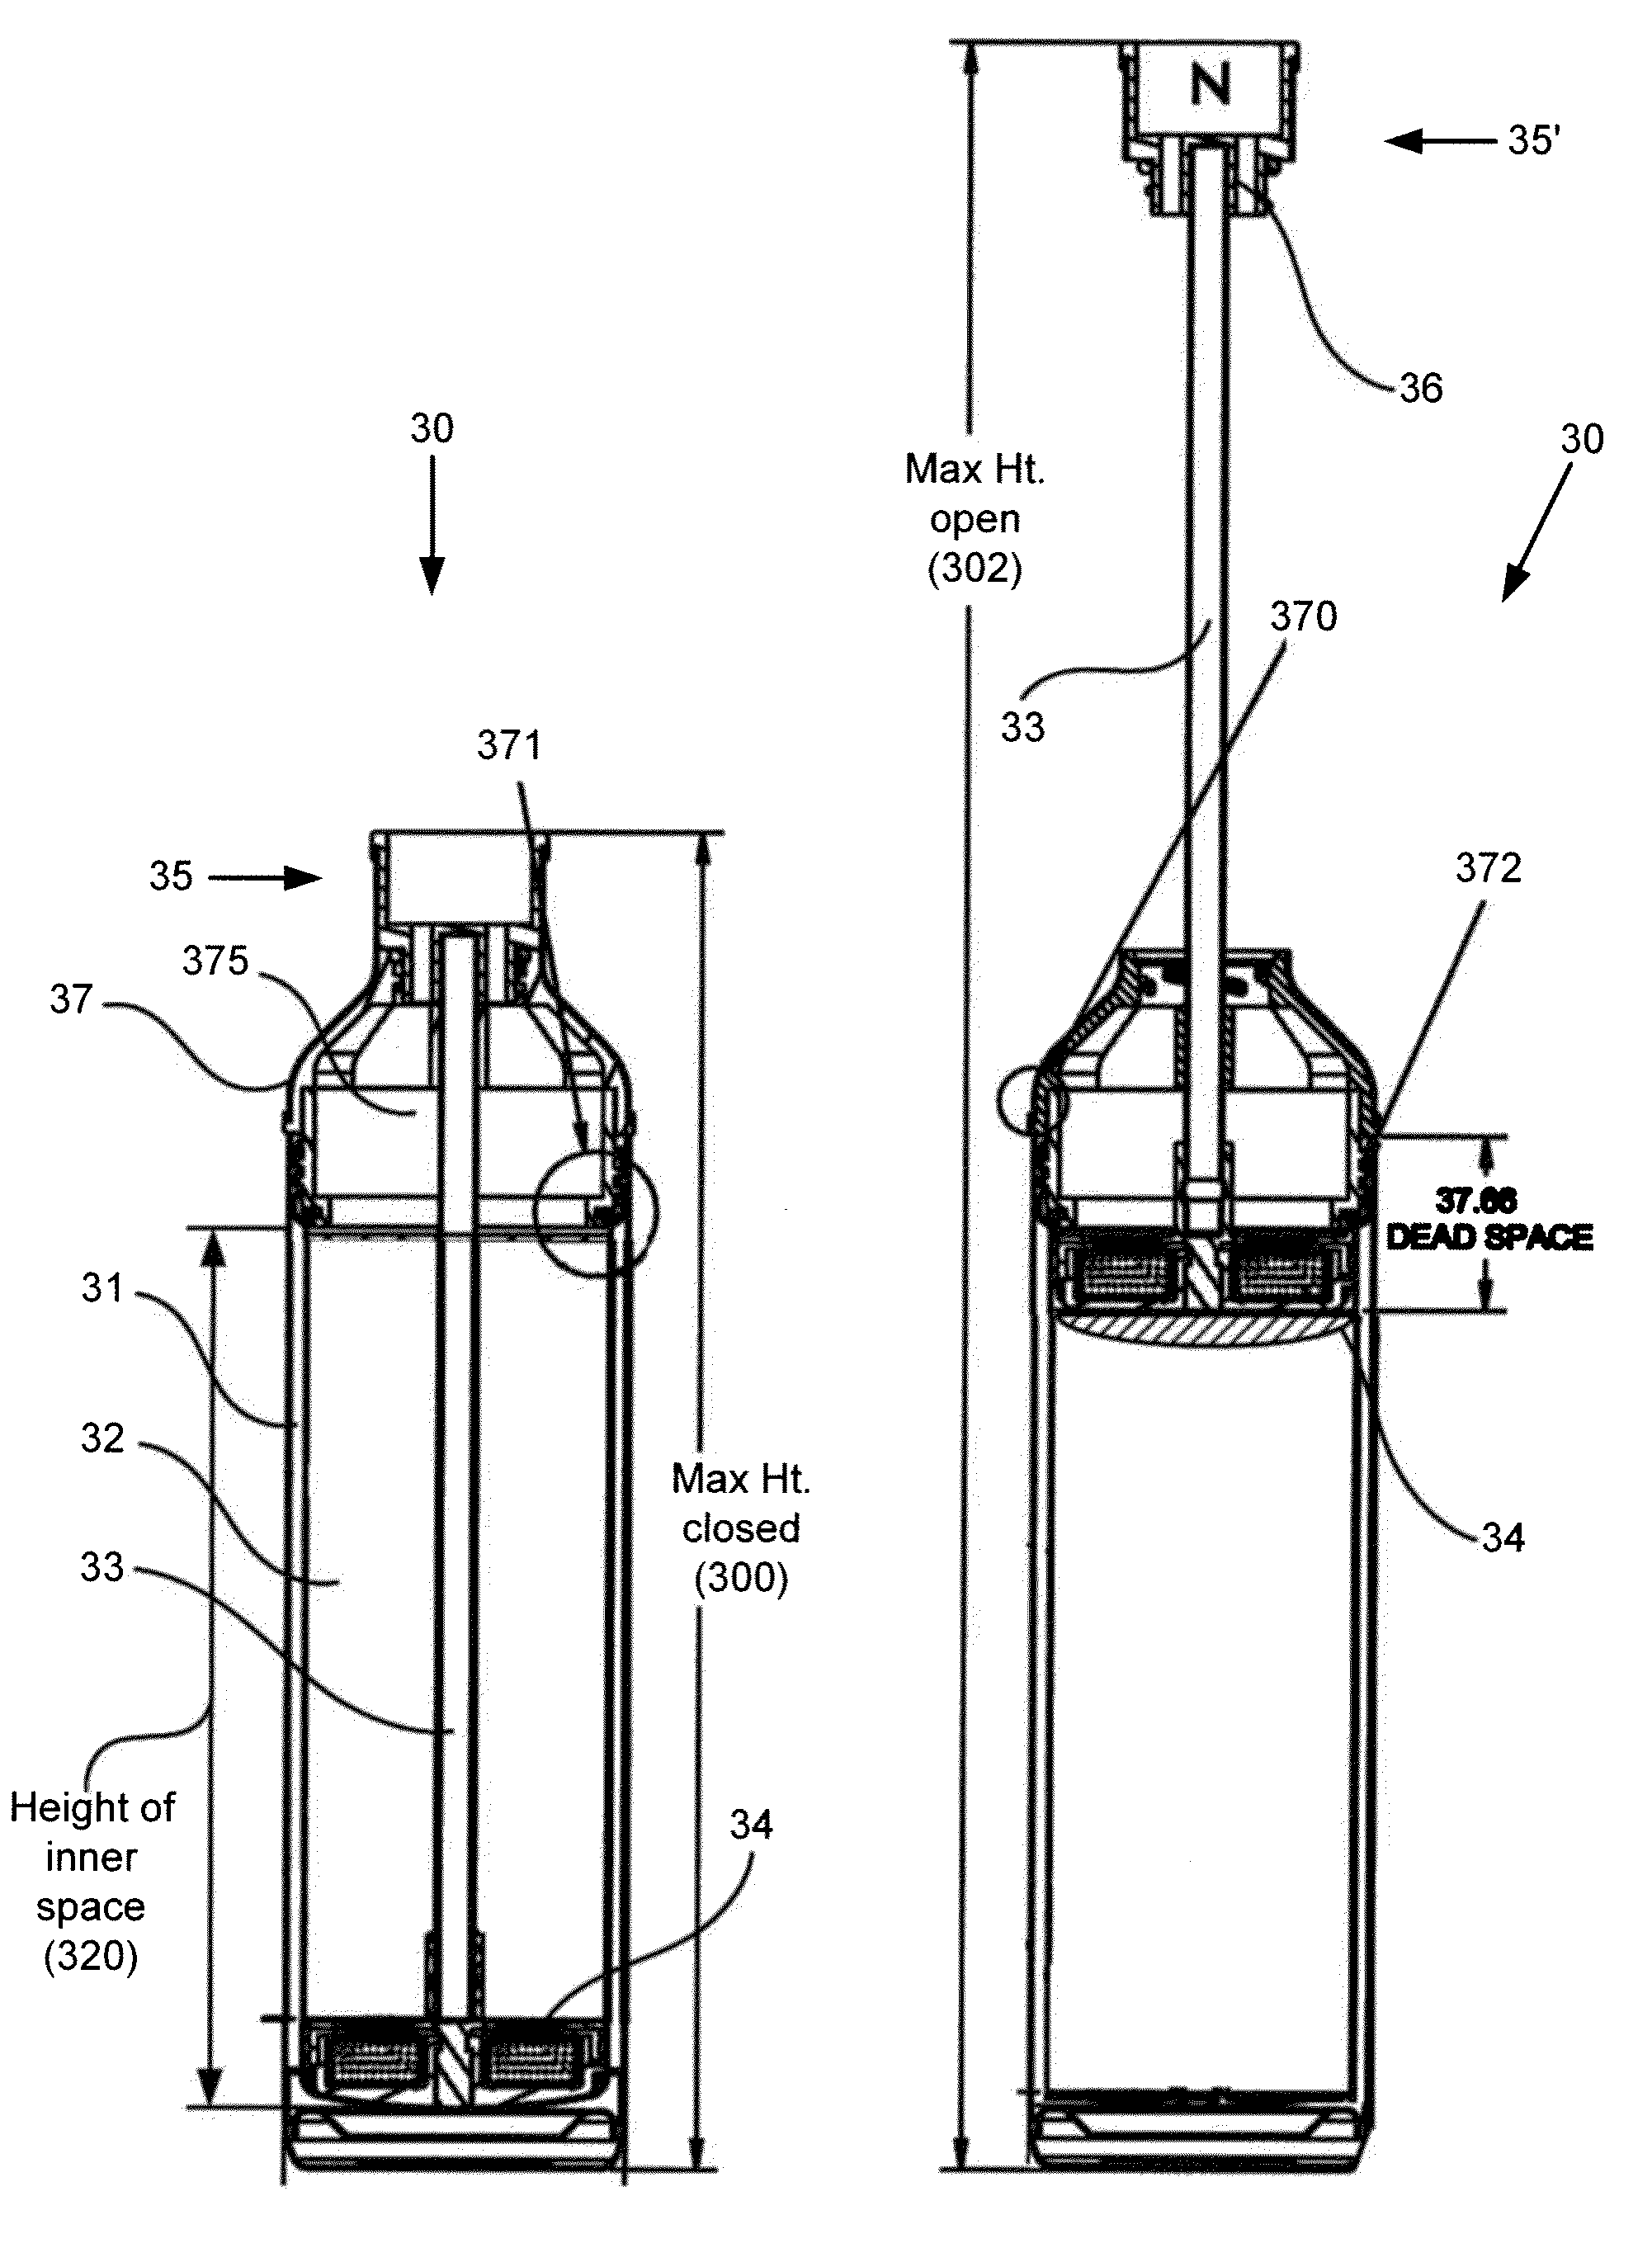 Bottle with an integrated filtration assembly that is manually operated using a plunger